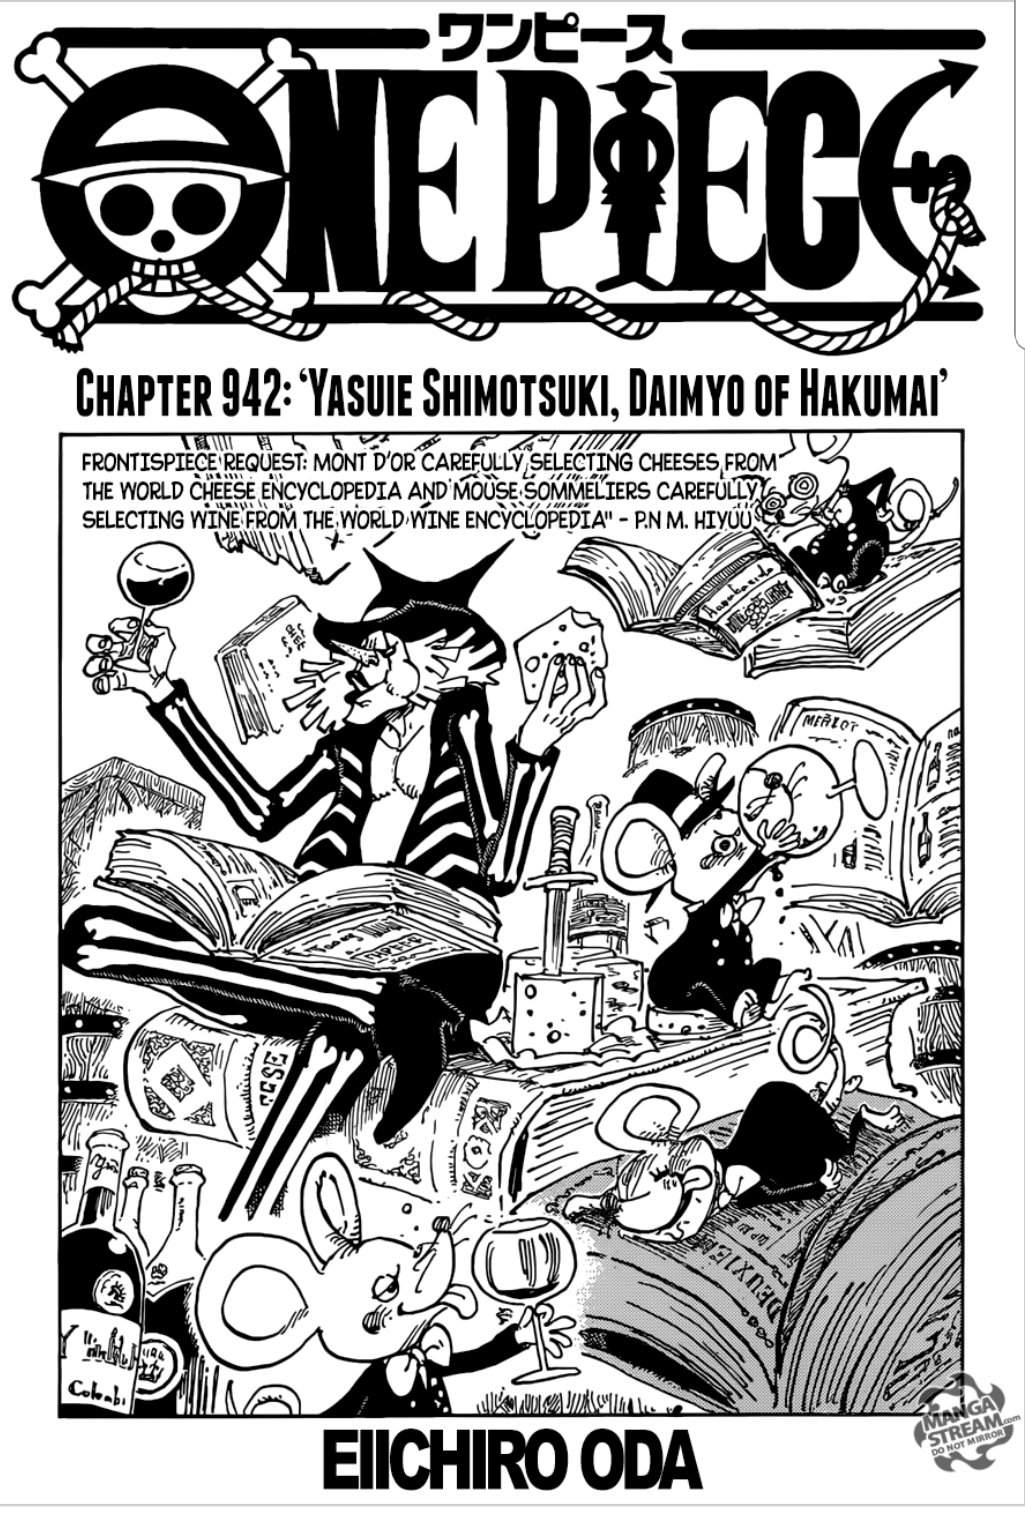 Chapter 942 Is Out It S Been A While Seems Last Time So What S Going To Happen Next One Piece Amino